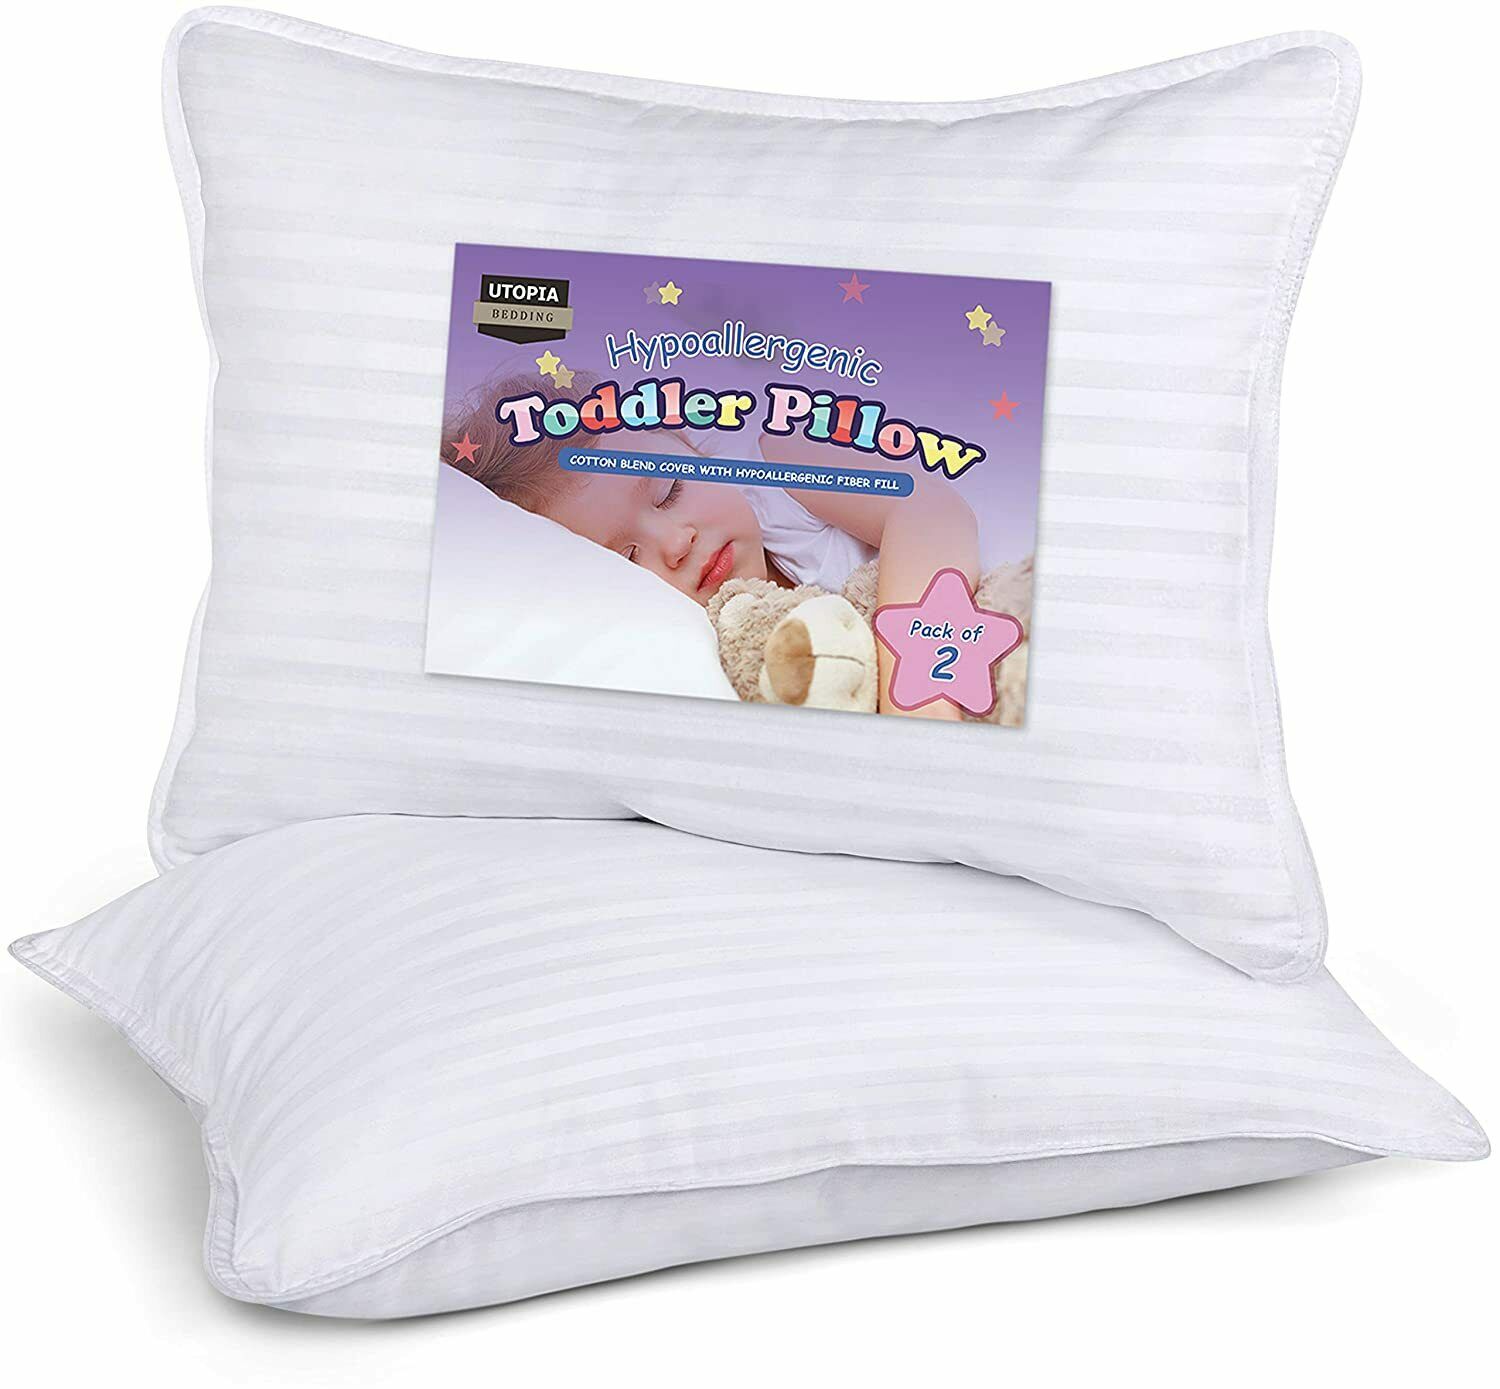 Toddler Pillows 2 Pack Baby Pillow Infant Pillow Cotton Cover Utopia Bedding